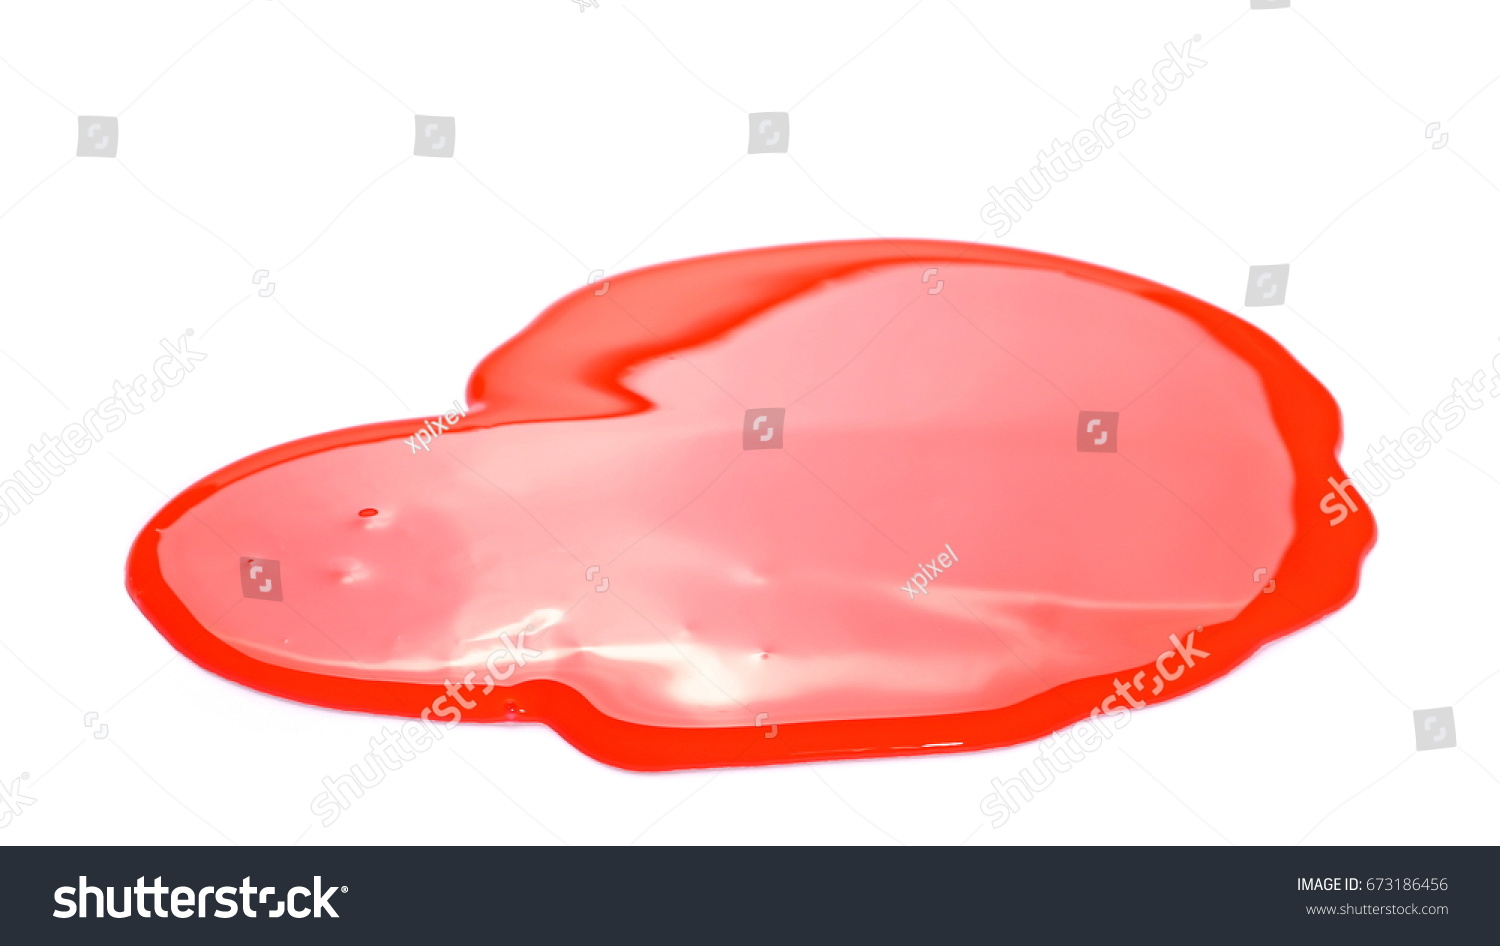 Blood spatter isolated on white background, with clipping path #673186456